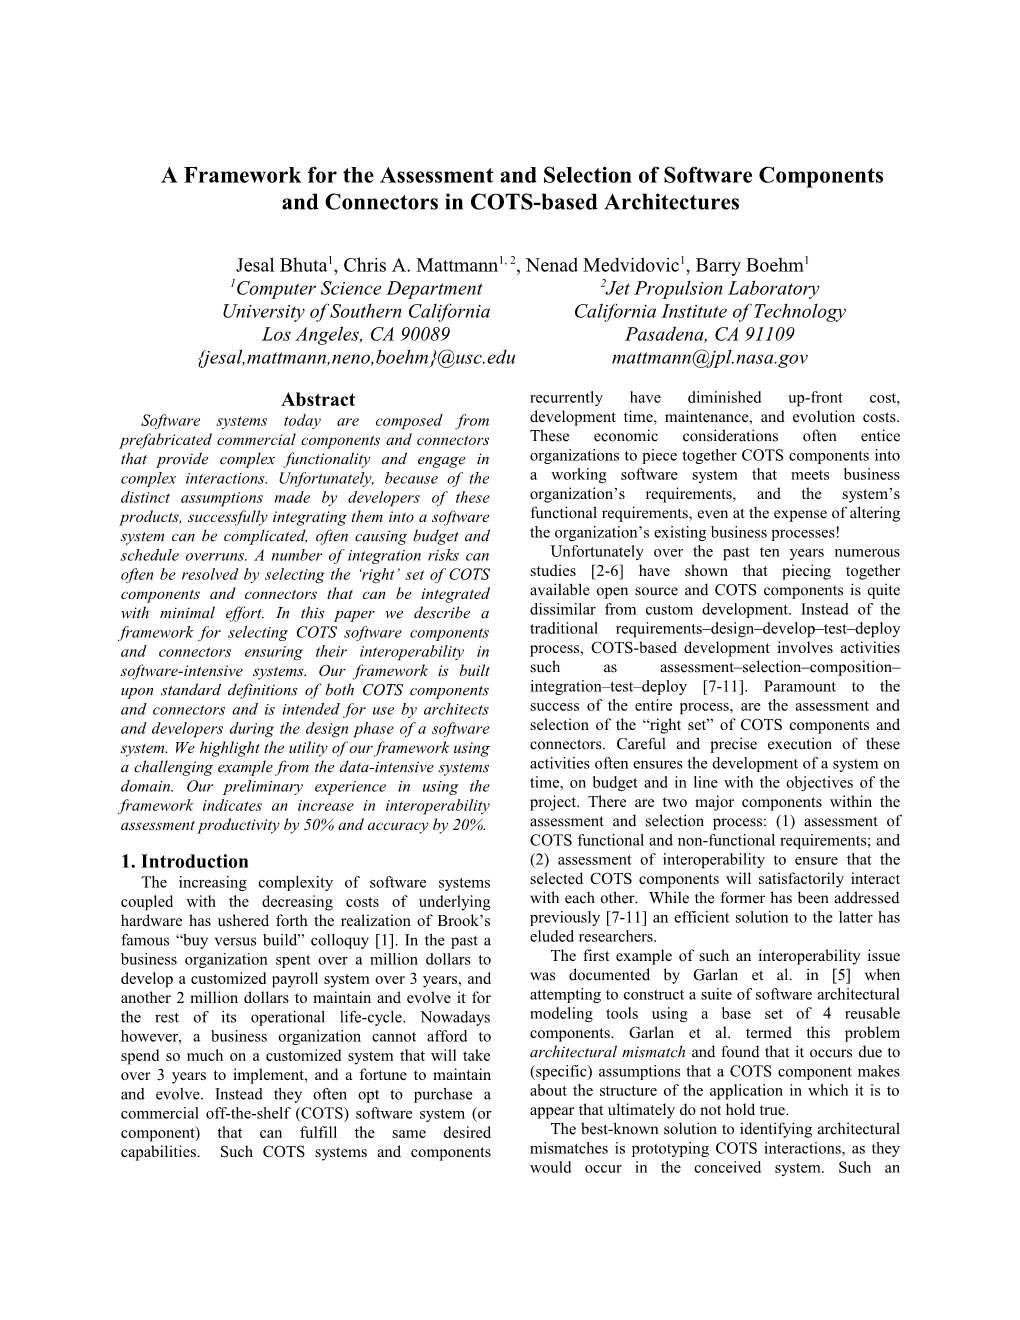 A Framework for the Assessment and Selection of Software Components and Connectors in COTS-Based